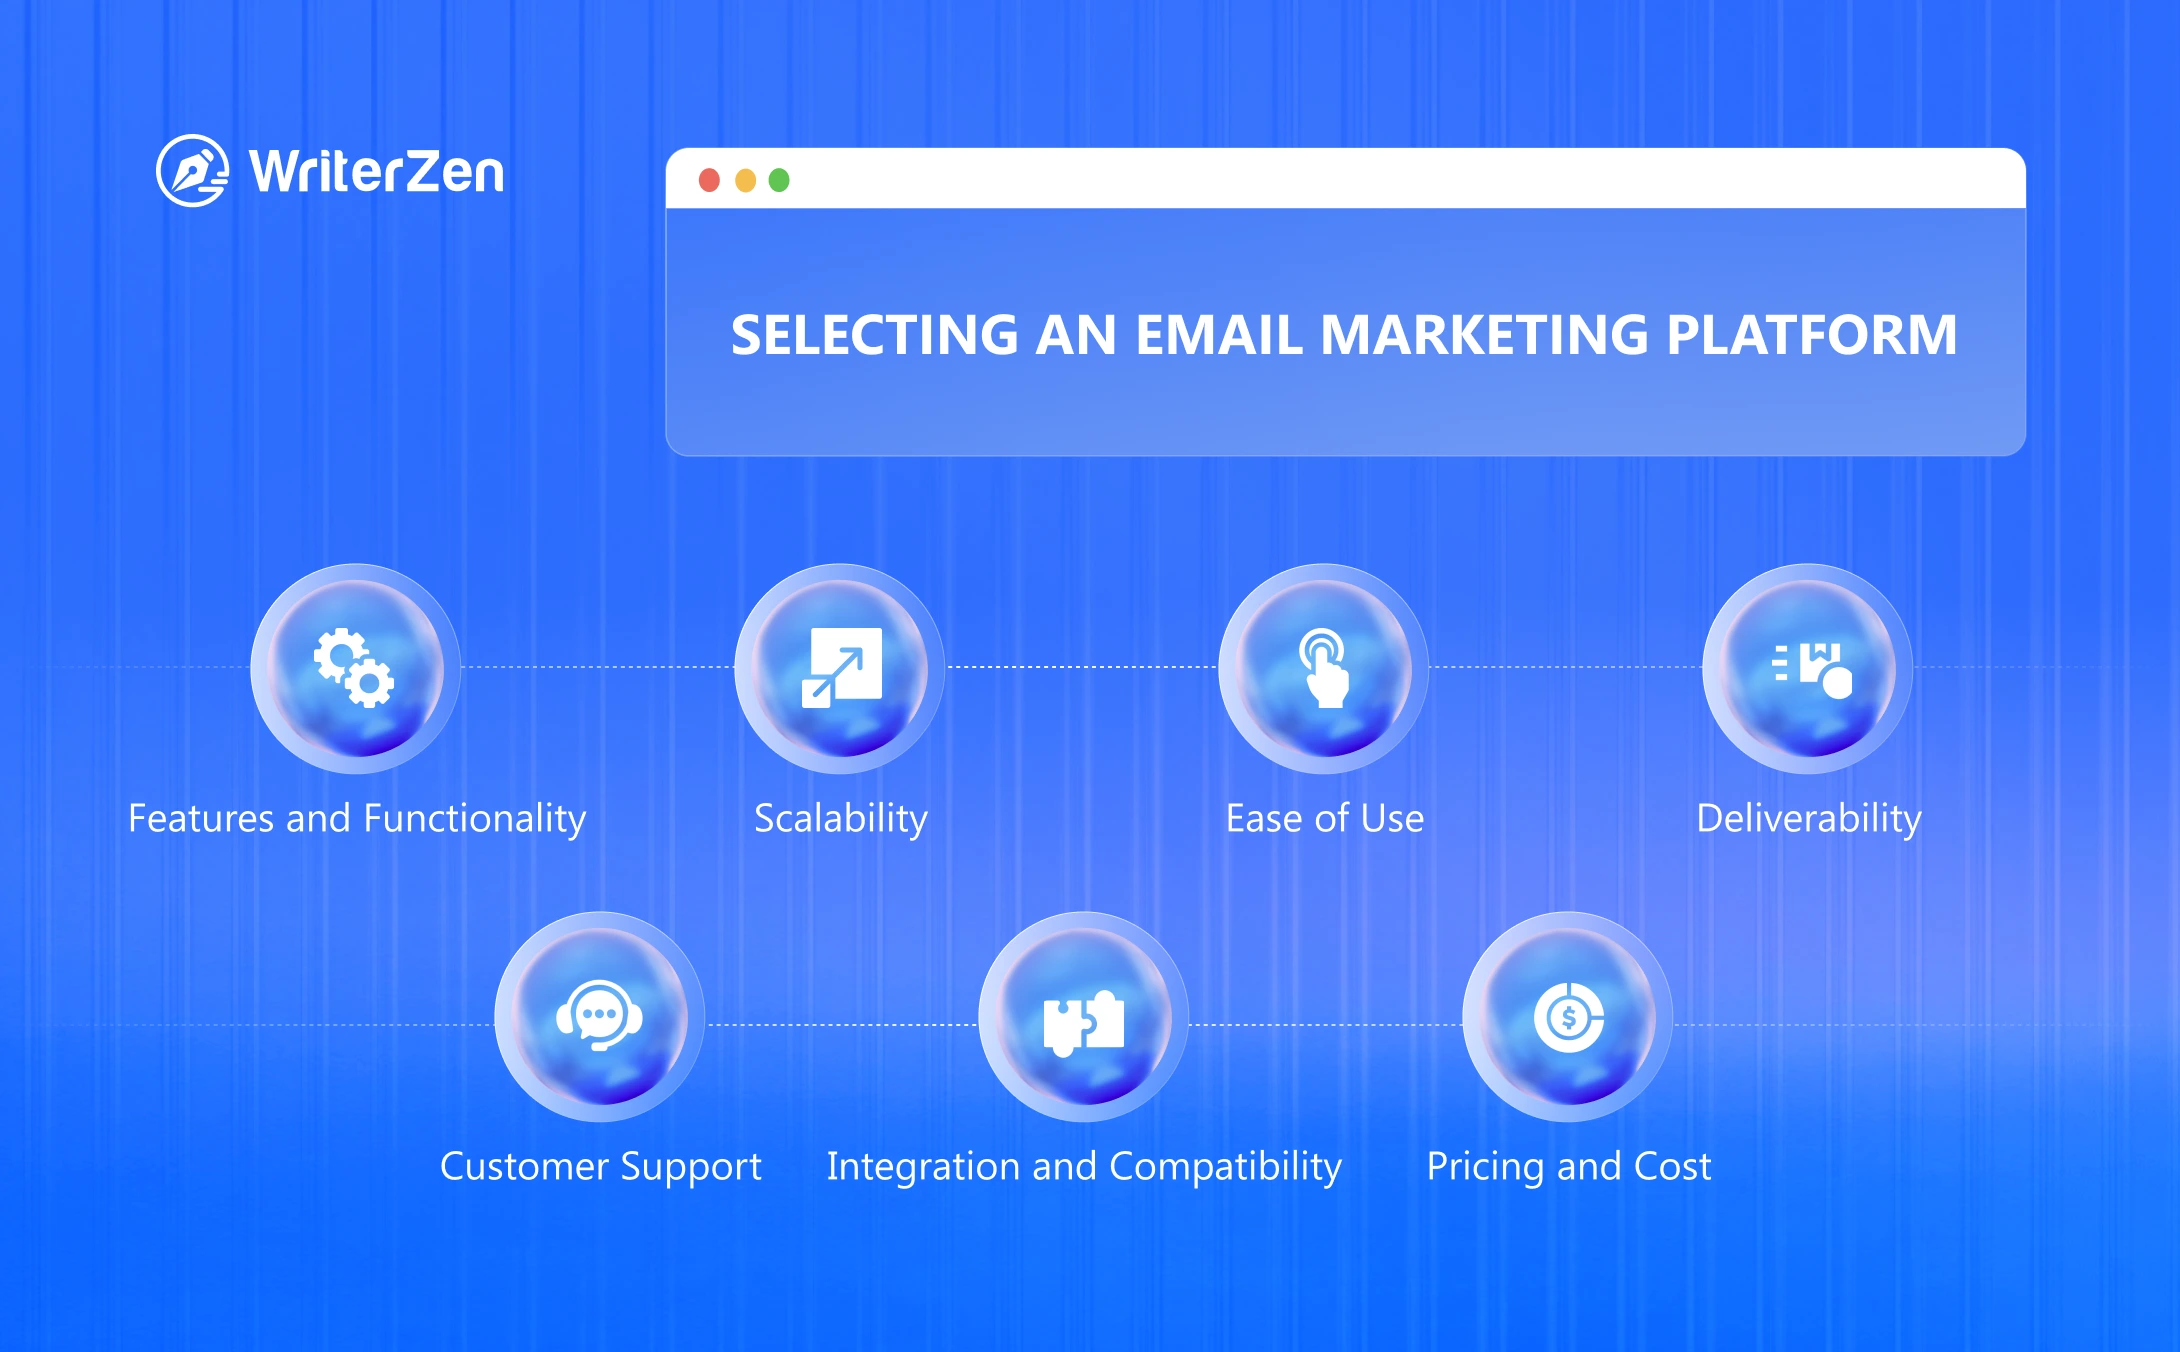 How to Select an Email Marketing Platform